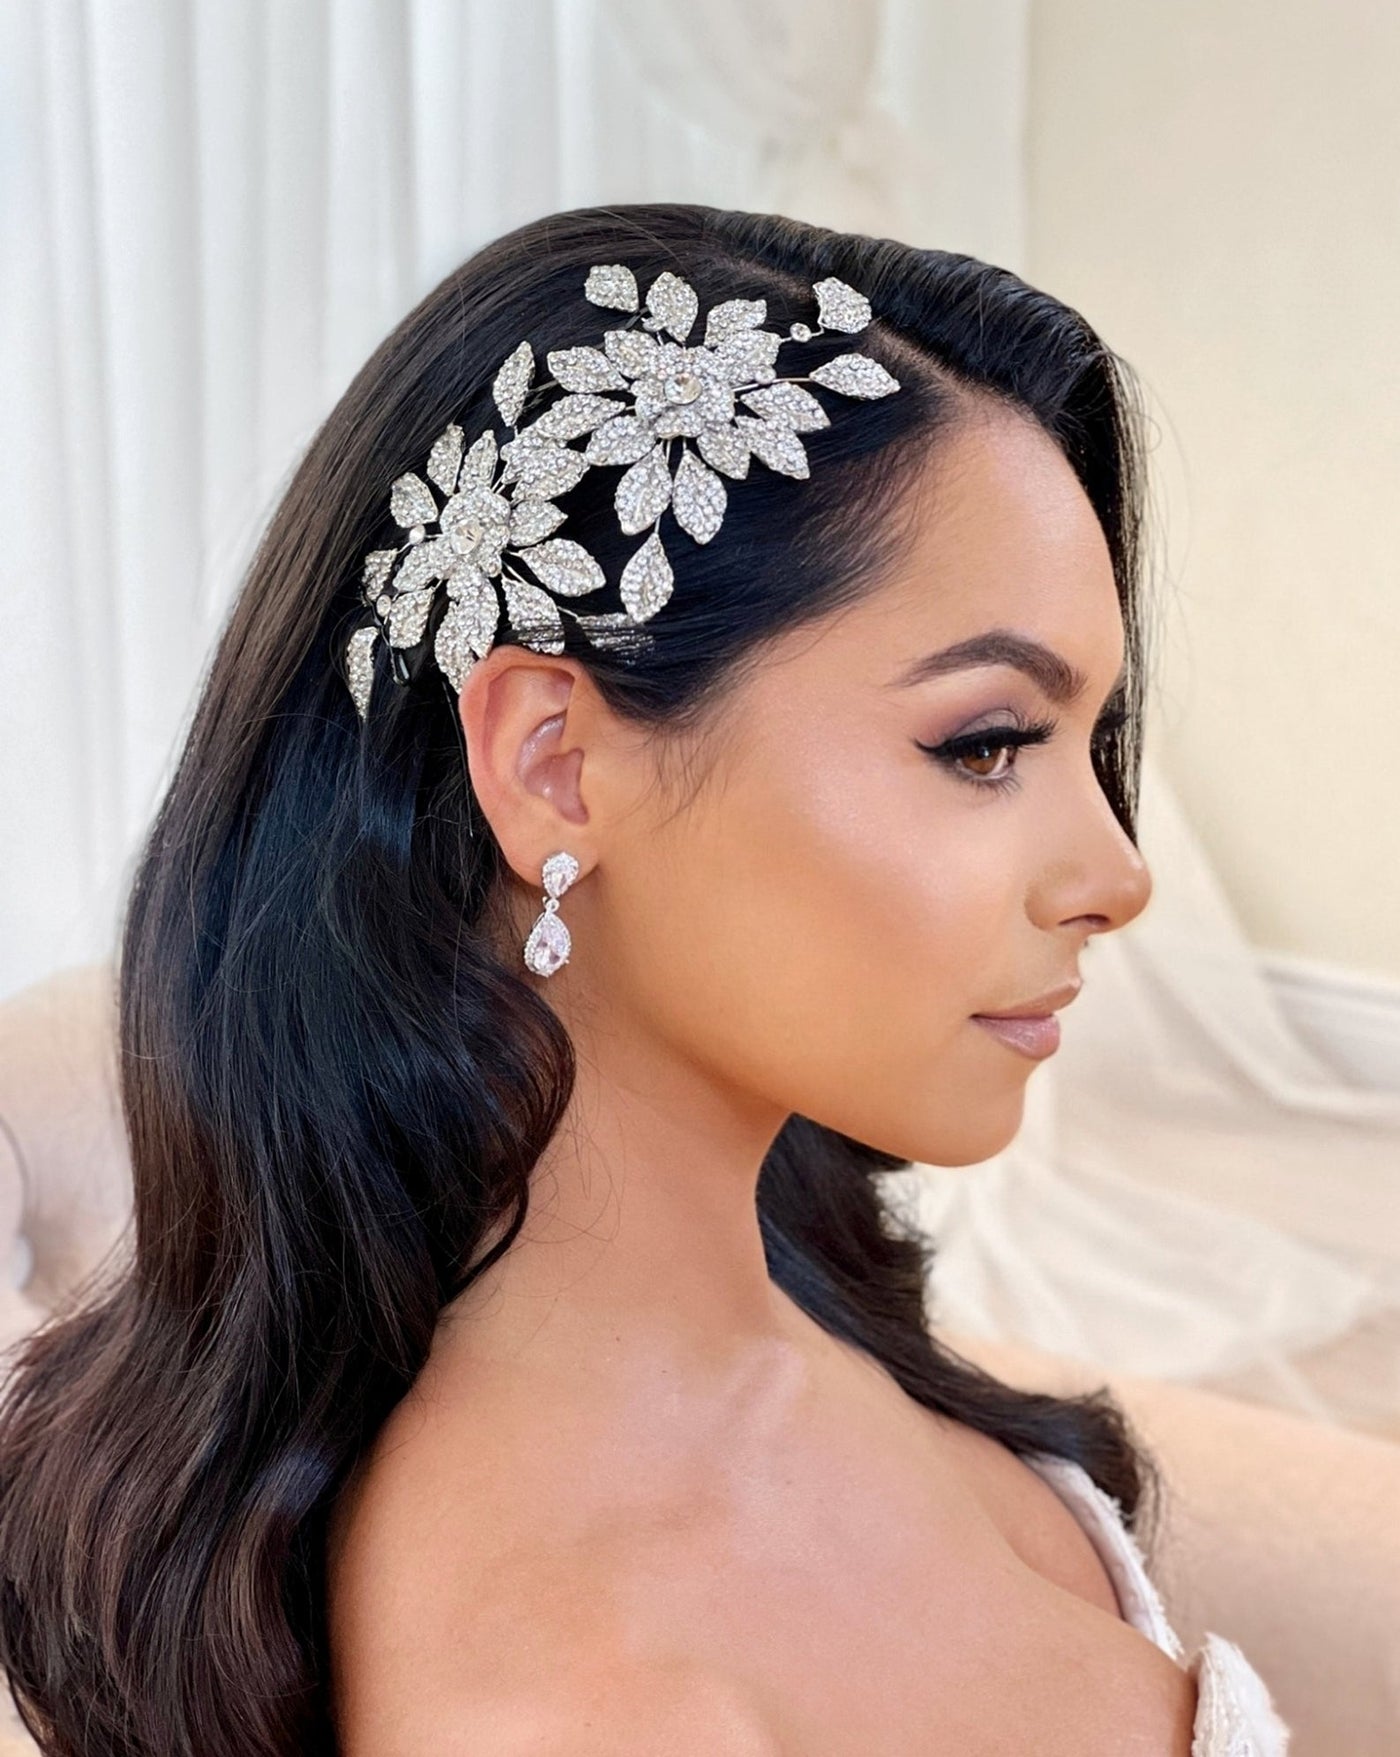 female model wearing bridal hair comb with crystalized silver flowers and leaves